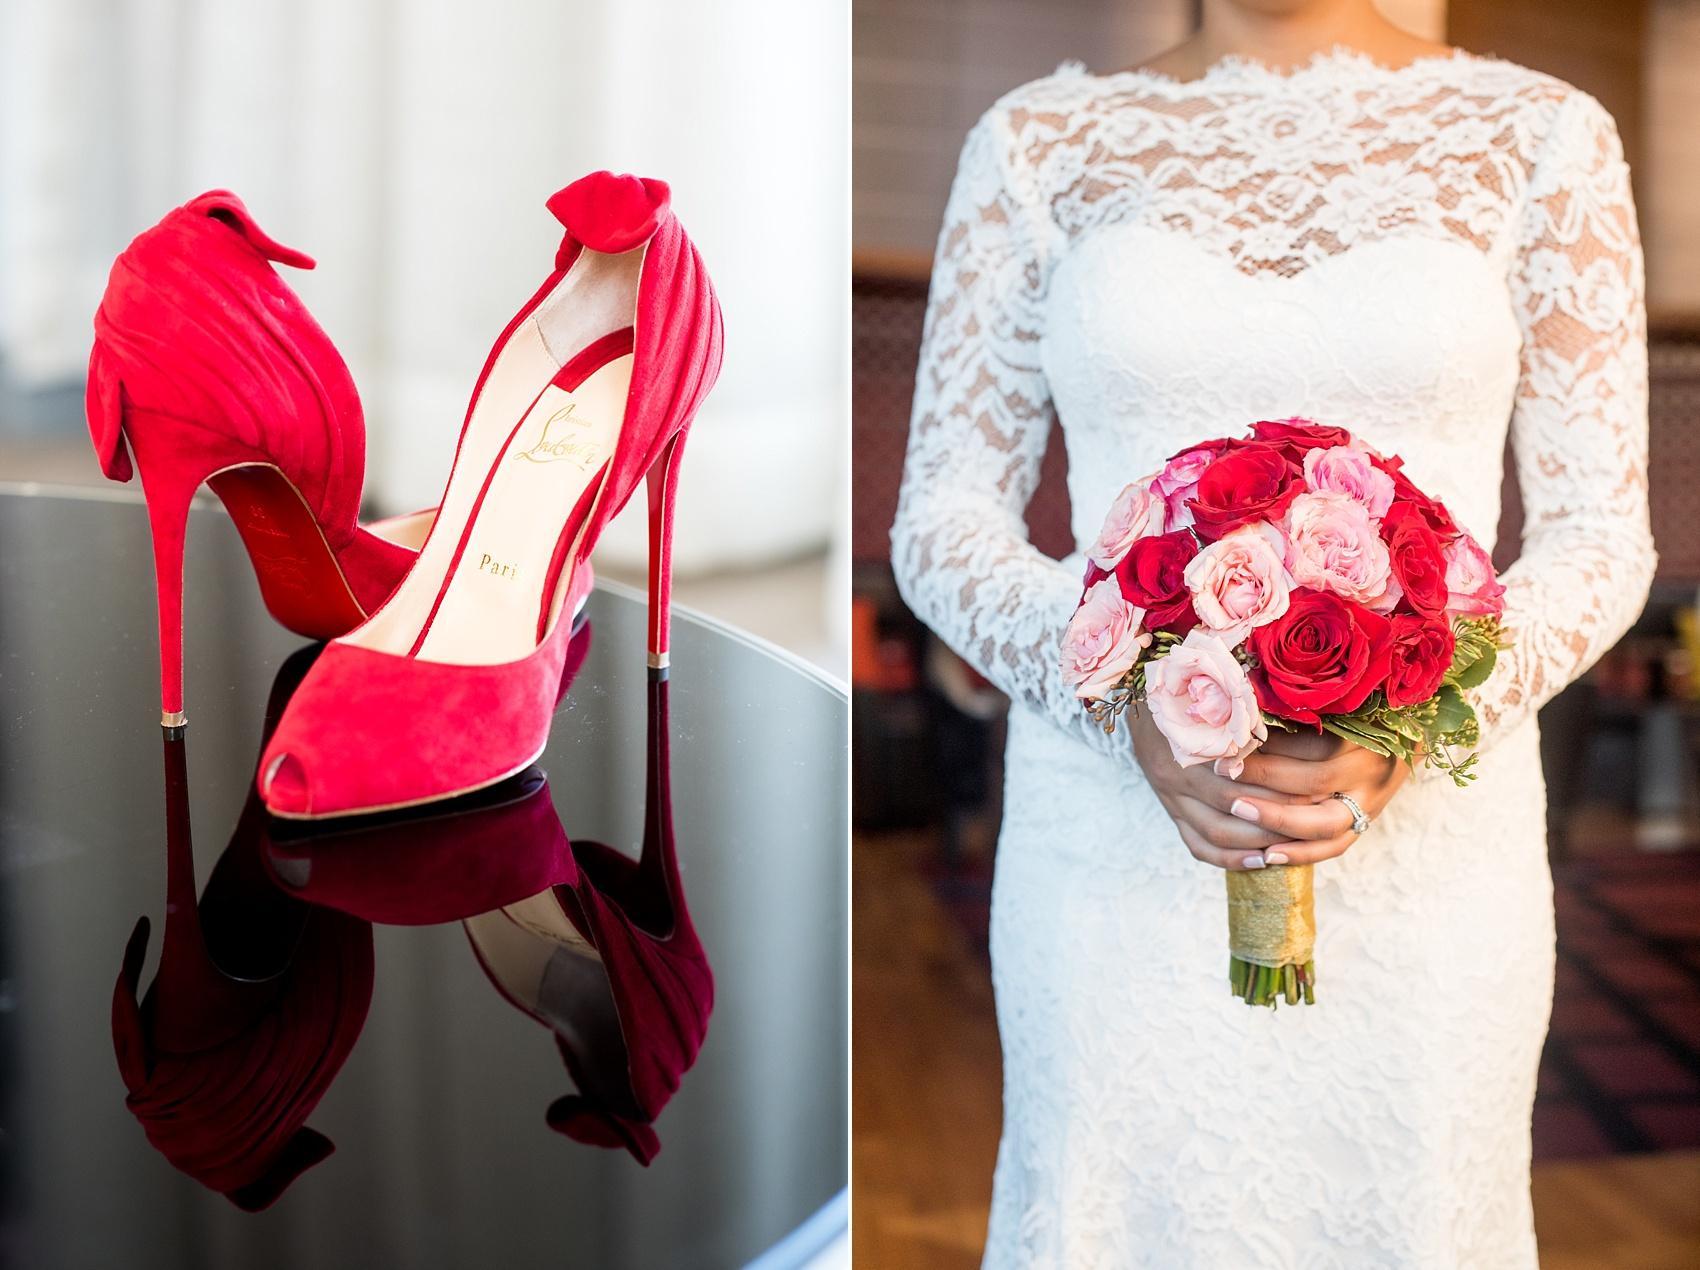 Red suede Christian Louboutin heels photo for the bride by Mikkel Paige Photography for a red, pink and black wedding. 